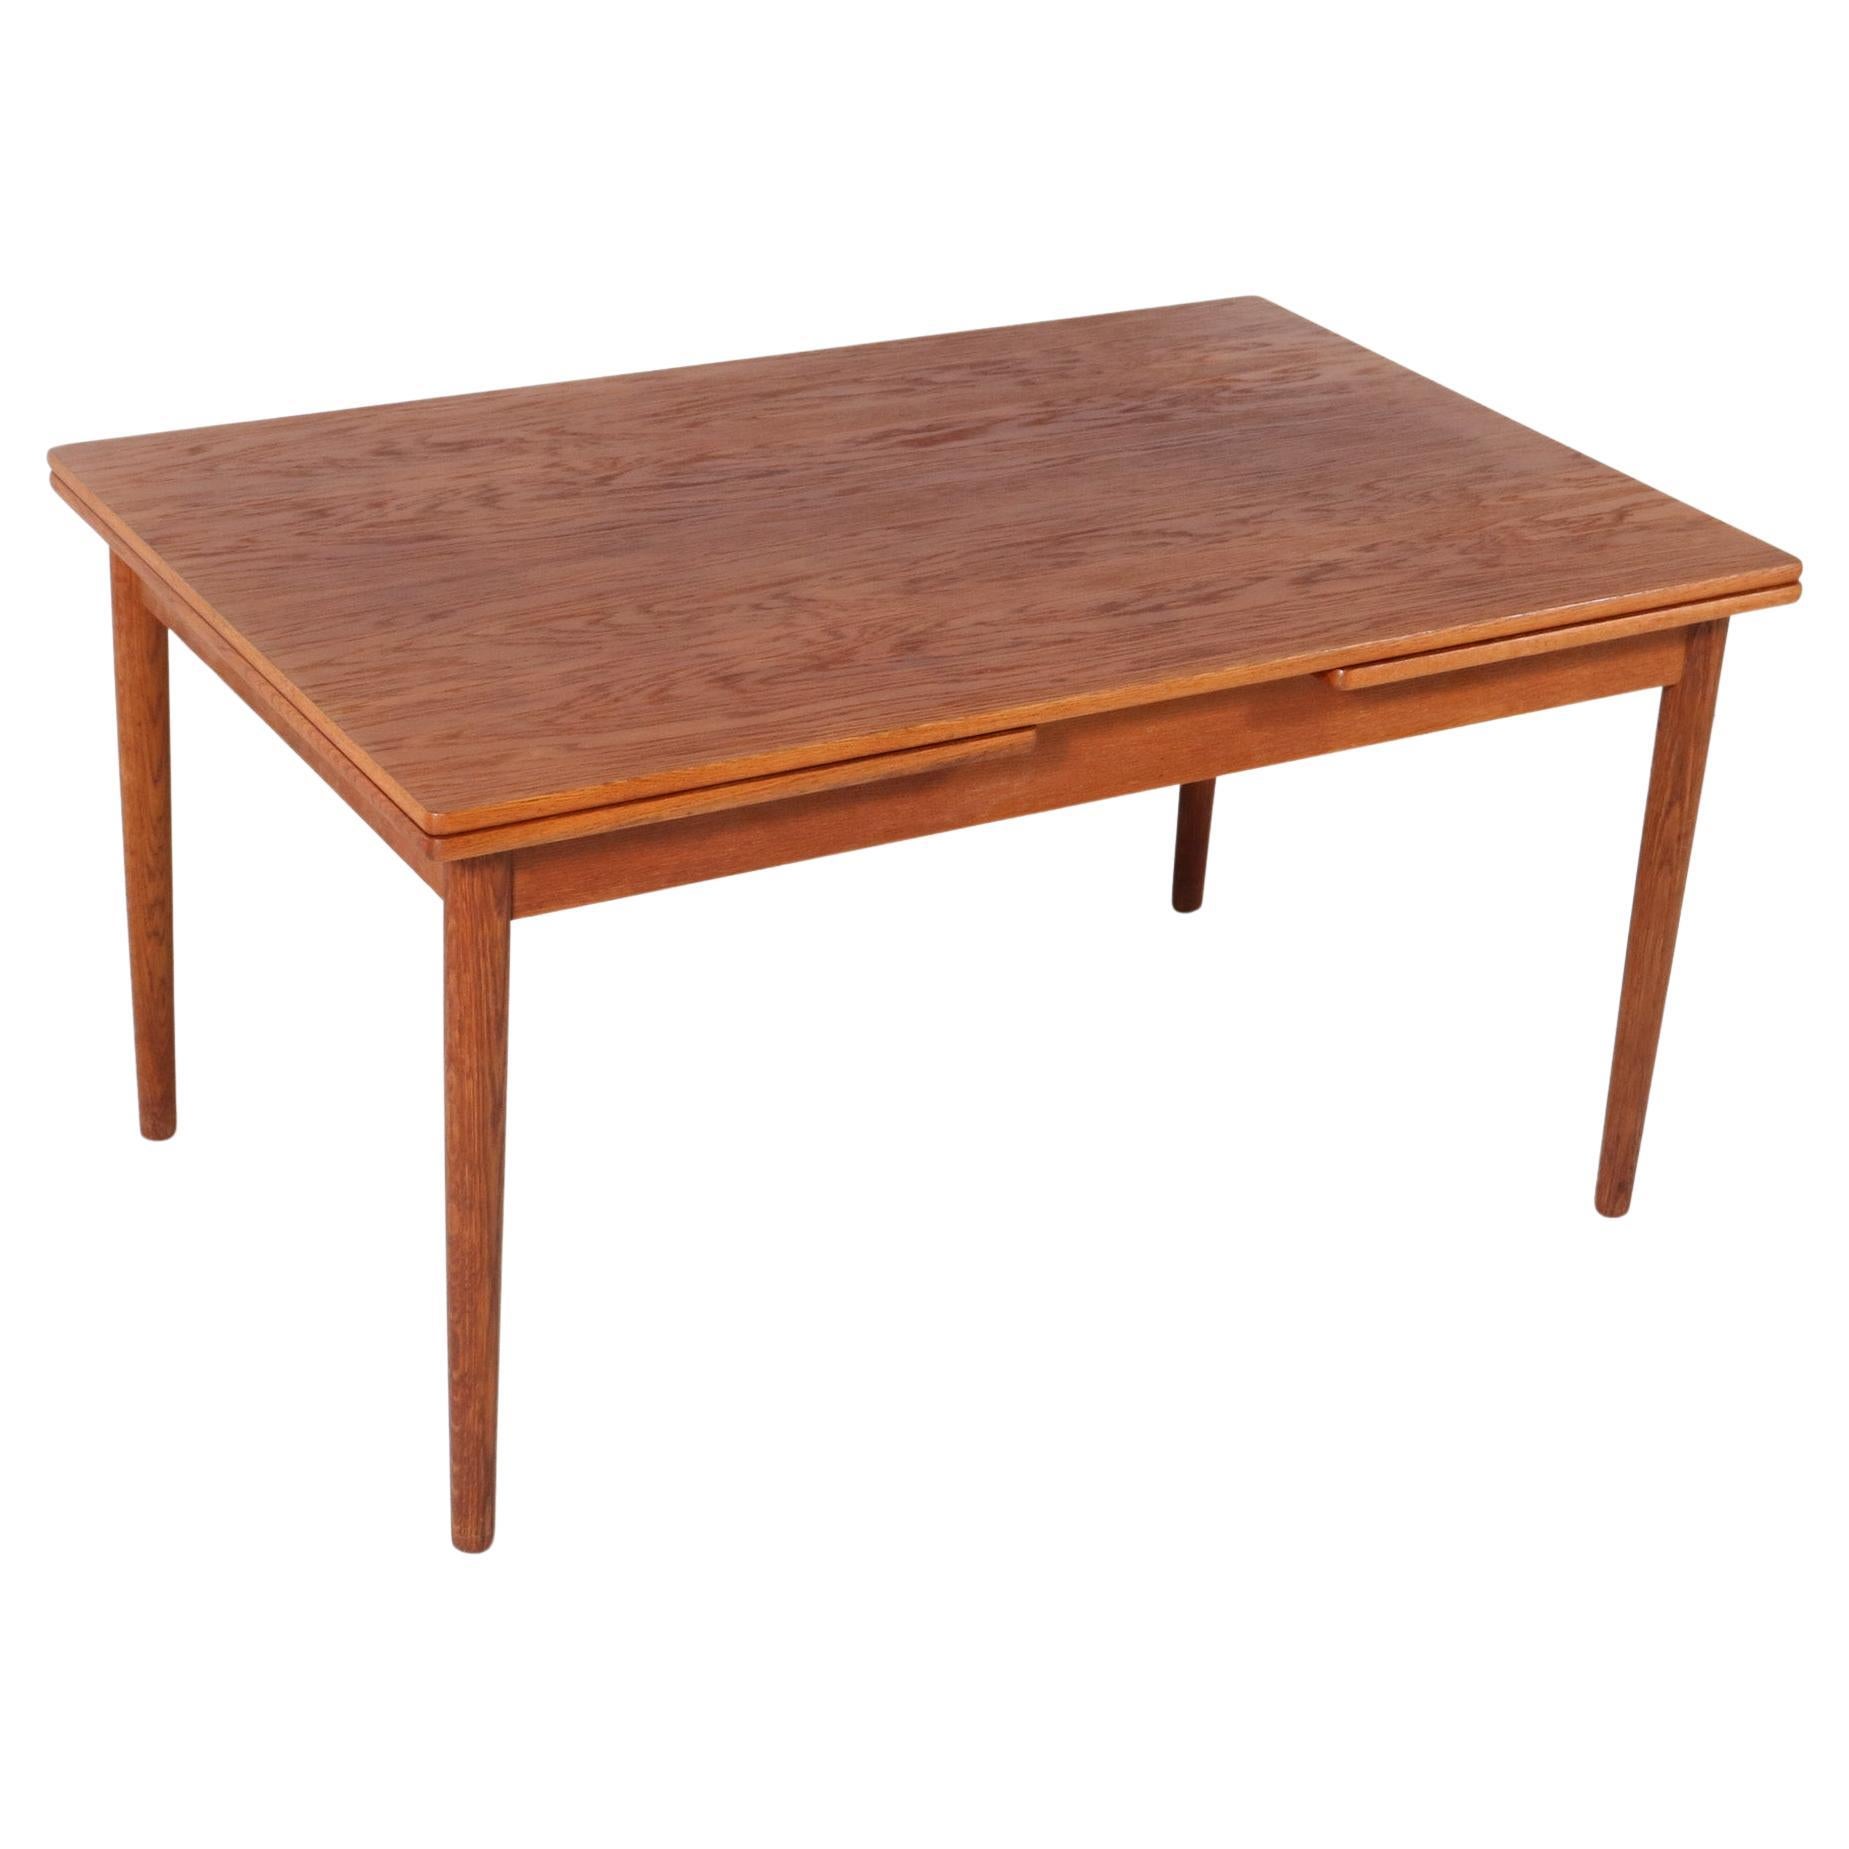  Mid-Century Modern Teak Extendable Dining Room Table Mo. 215 by Farstrup, 1960s For Sale